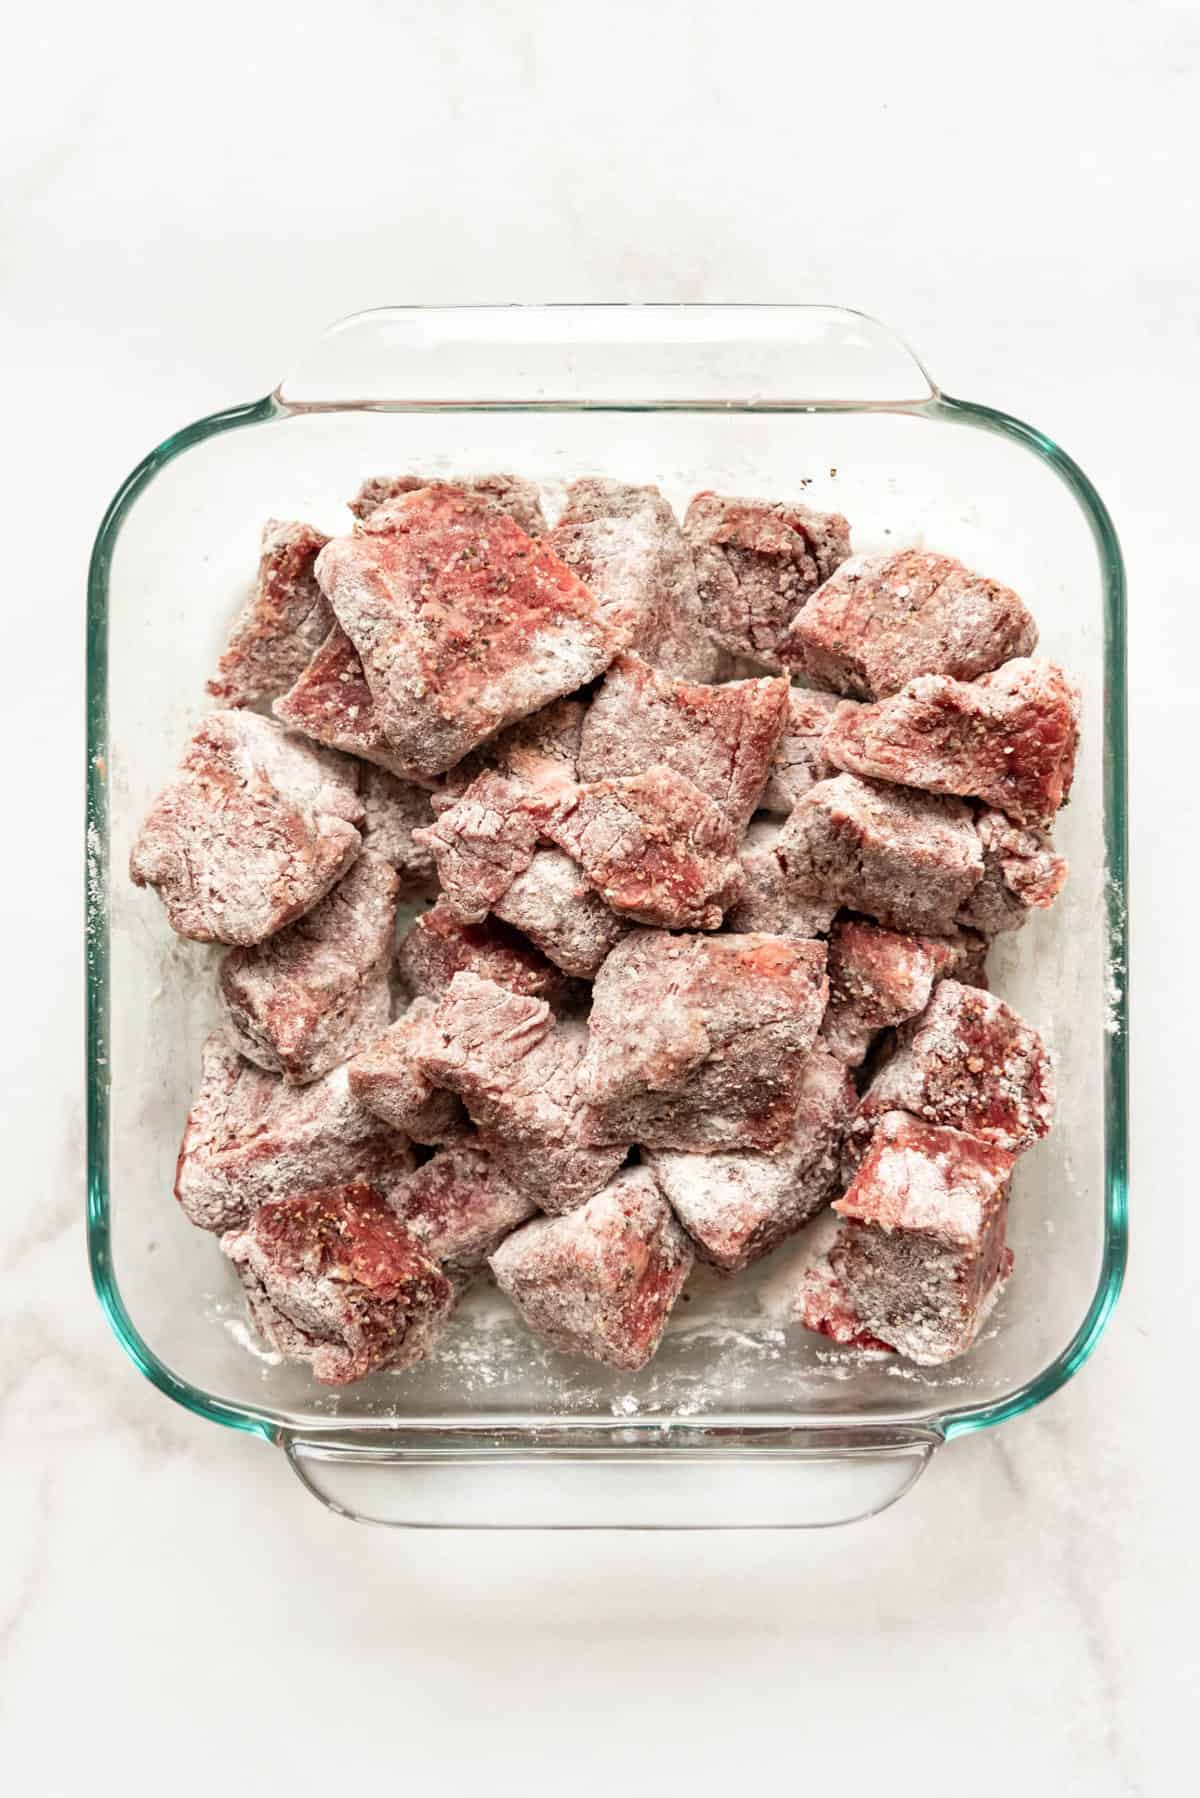 Beef stew meat dredged in flour, salt, and pepper in a glass dish.